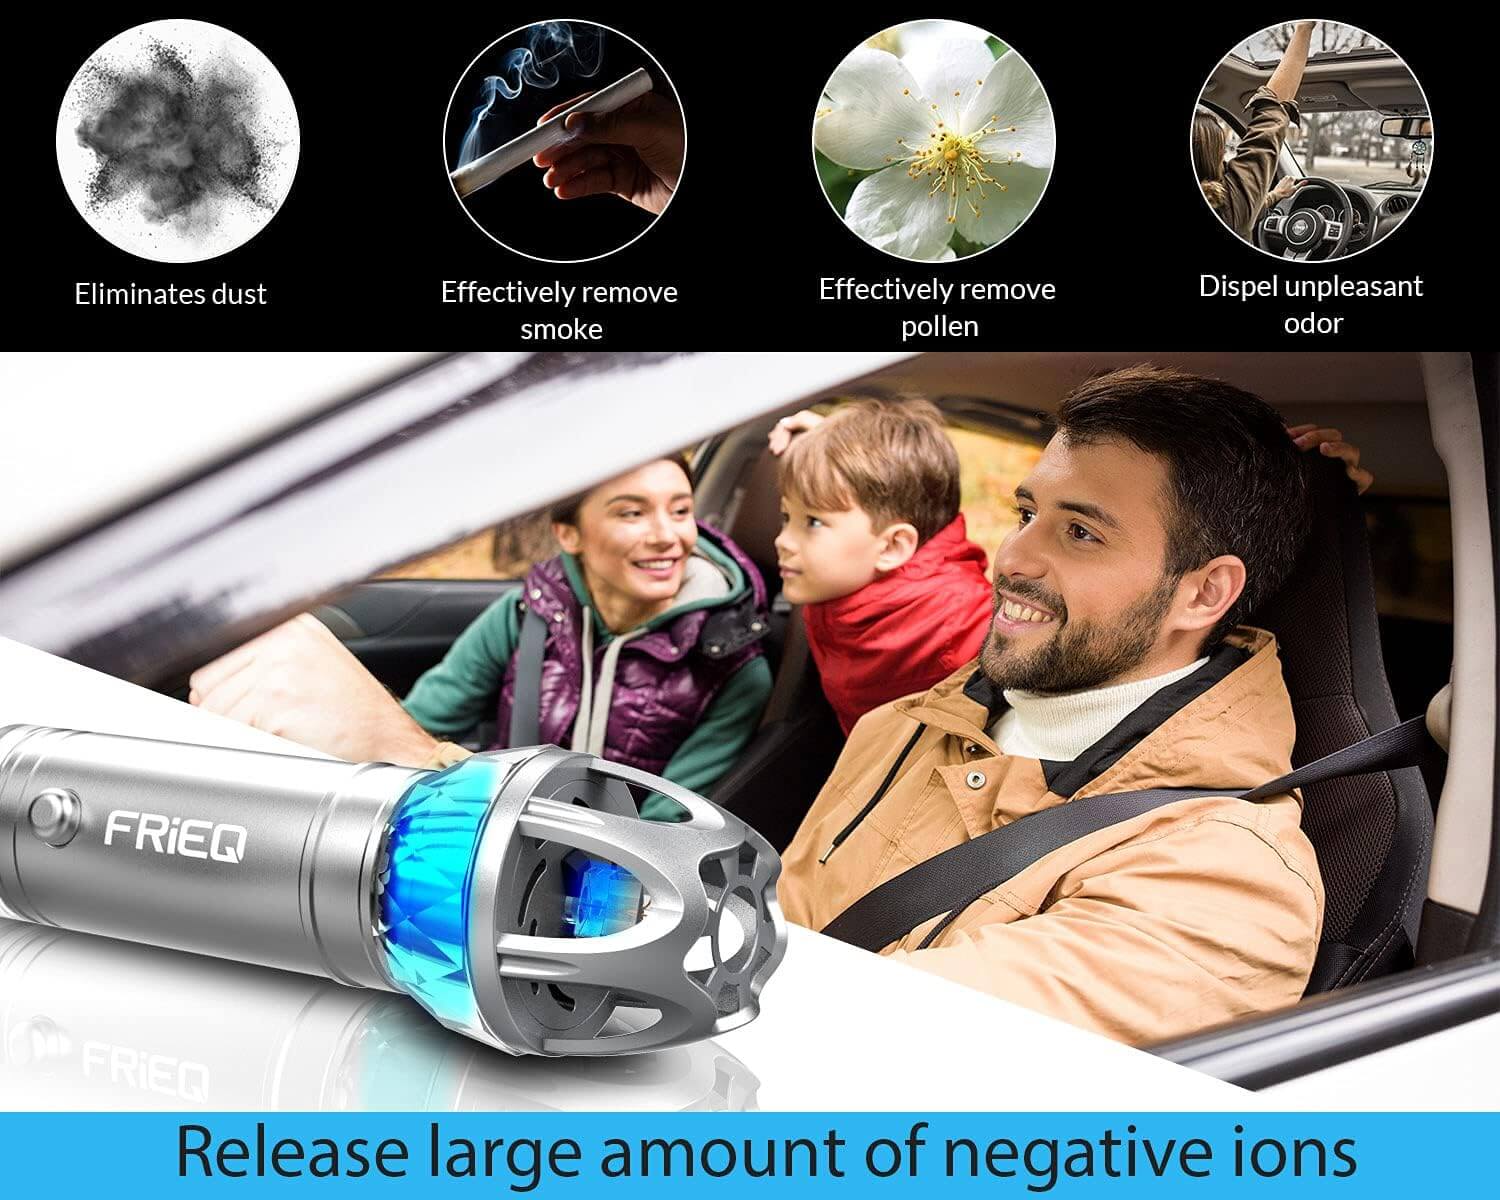 FRiEQ Car Air Purifier, Car Air Freshener and Ionic Air Purifier | Remove Dust, Pollen, Smoke and Bad Odors - Available for Your Auto or RV - Release large amount of negative ions